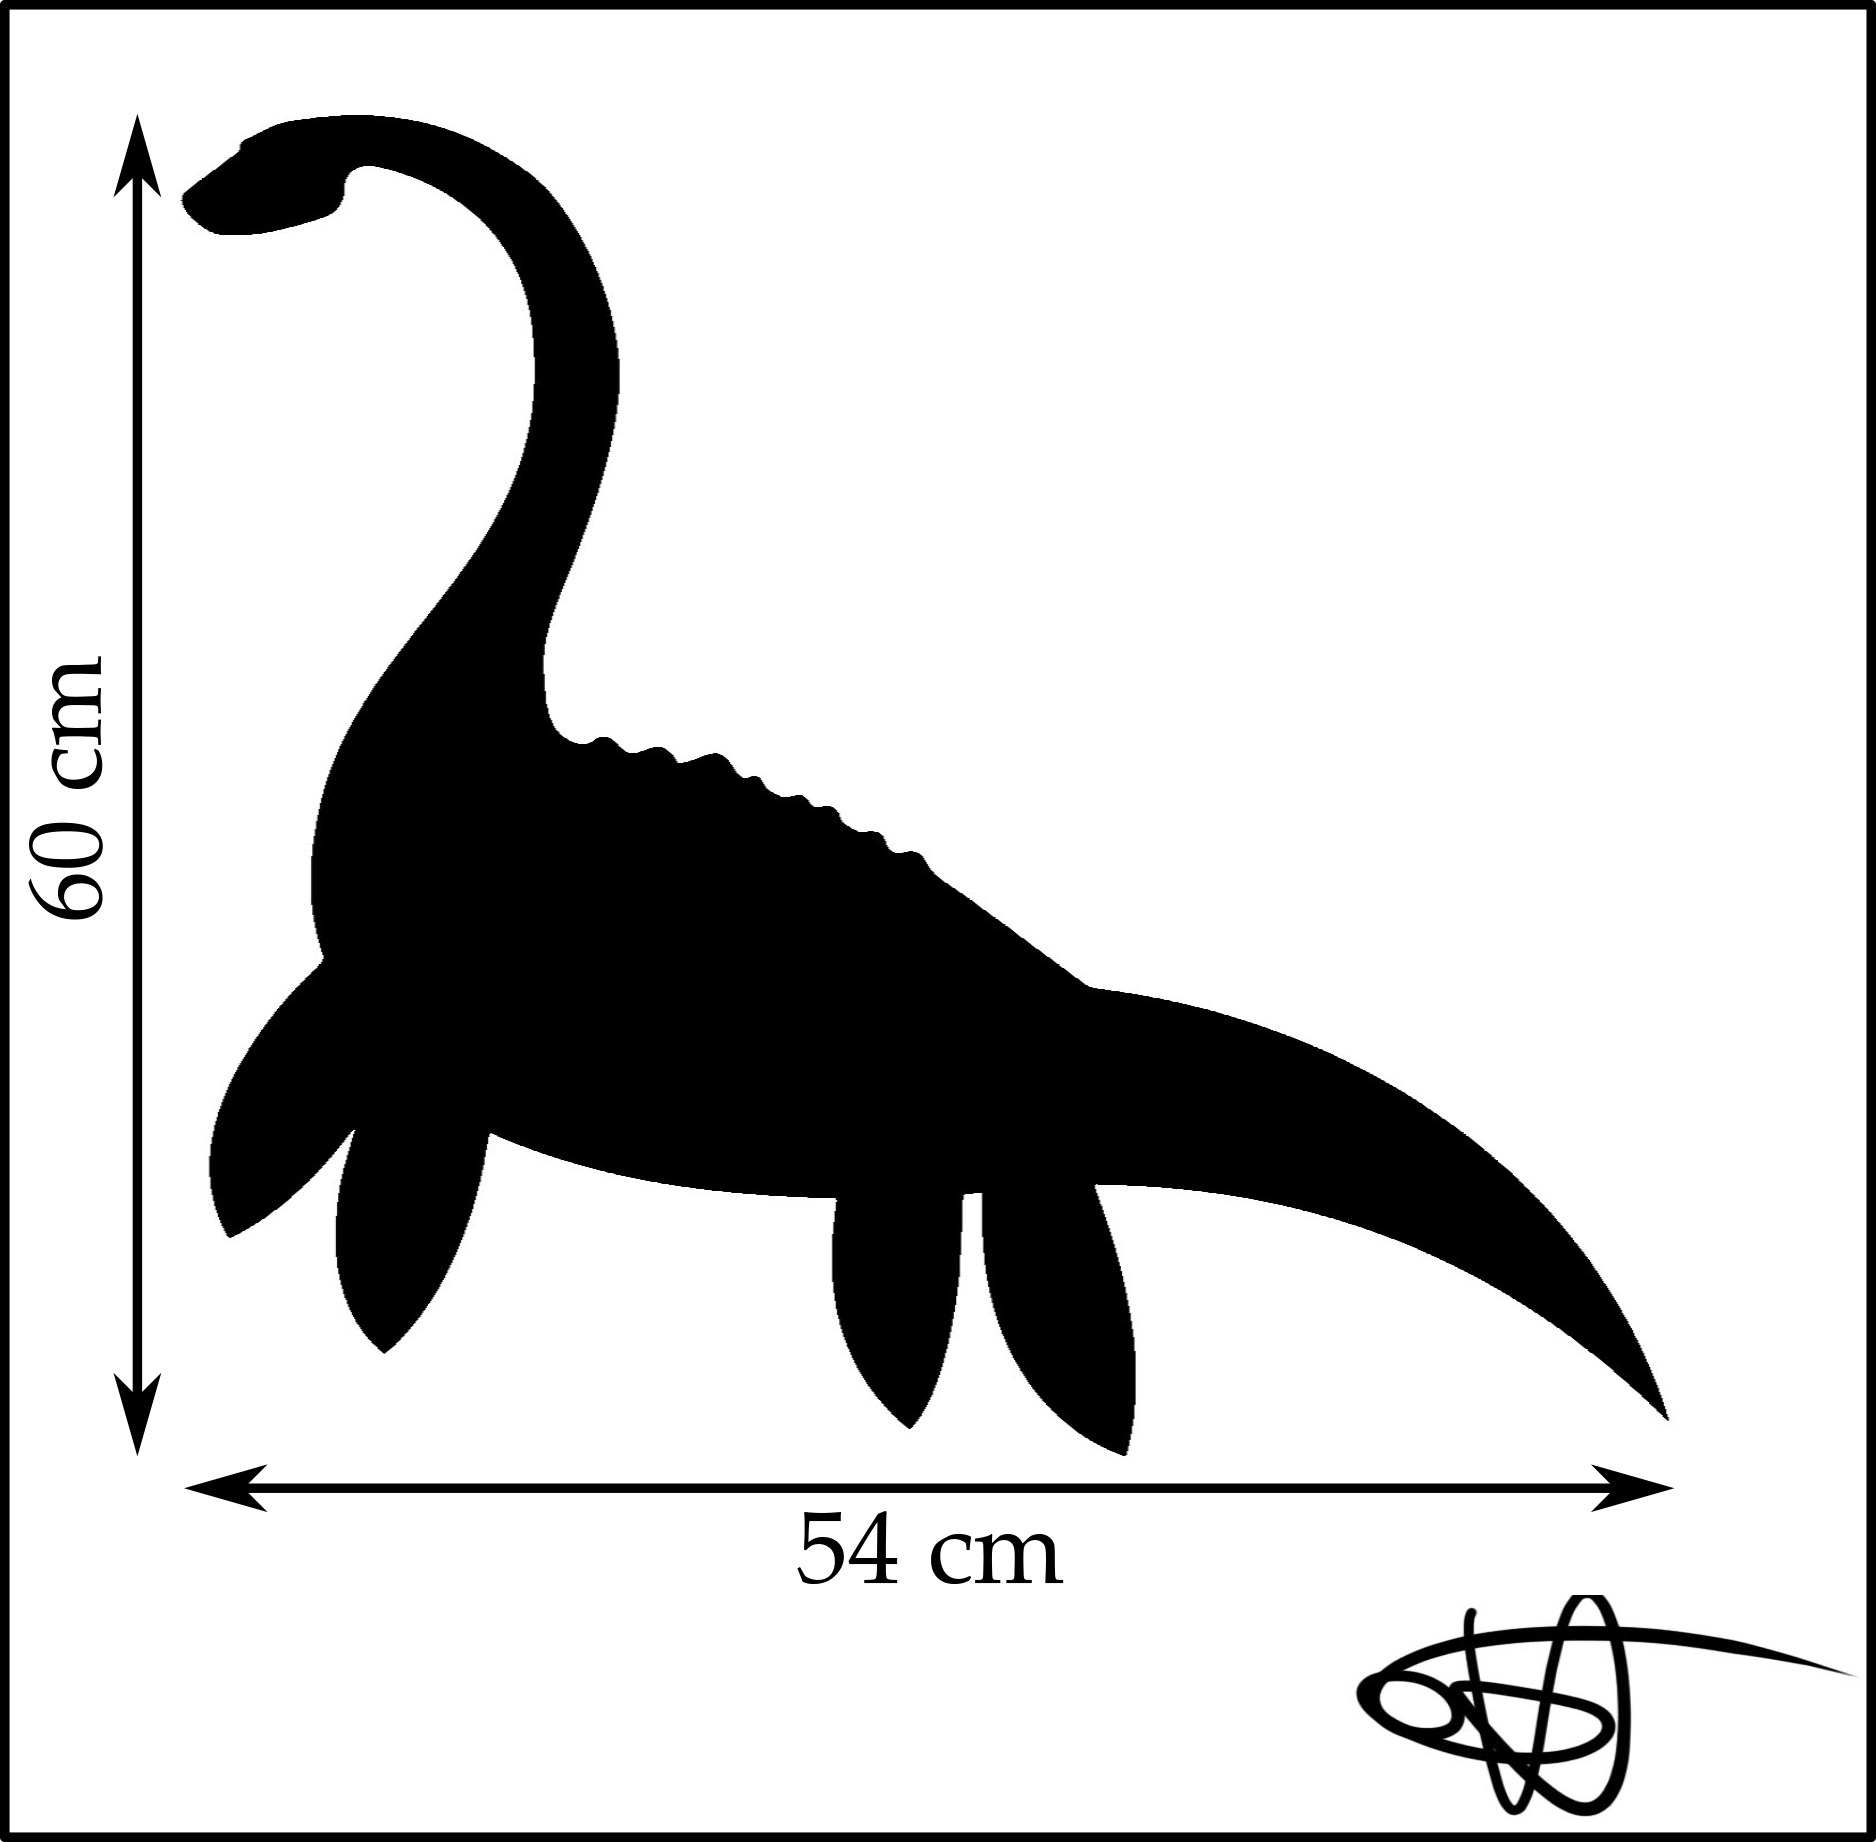 The picture of the Loch Ness Monster. The monster is 60 cm tall and 54 cm wide.